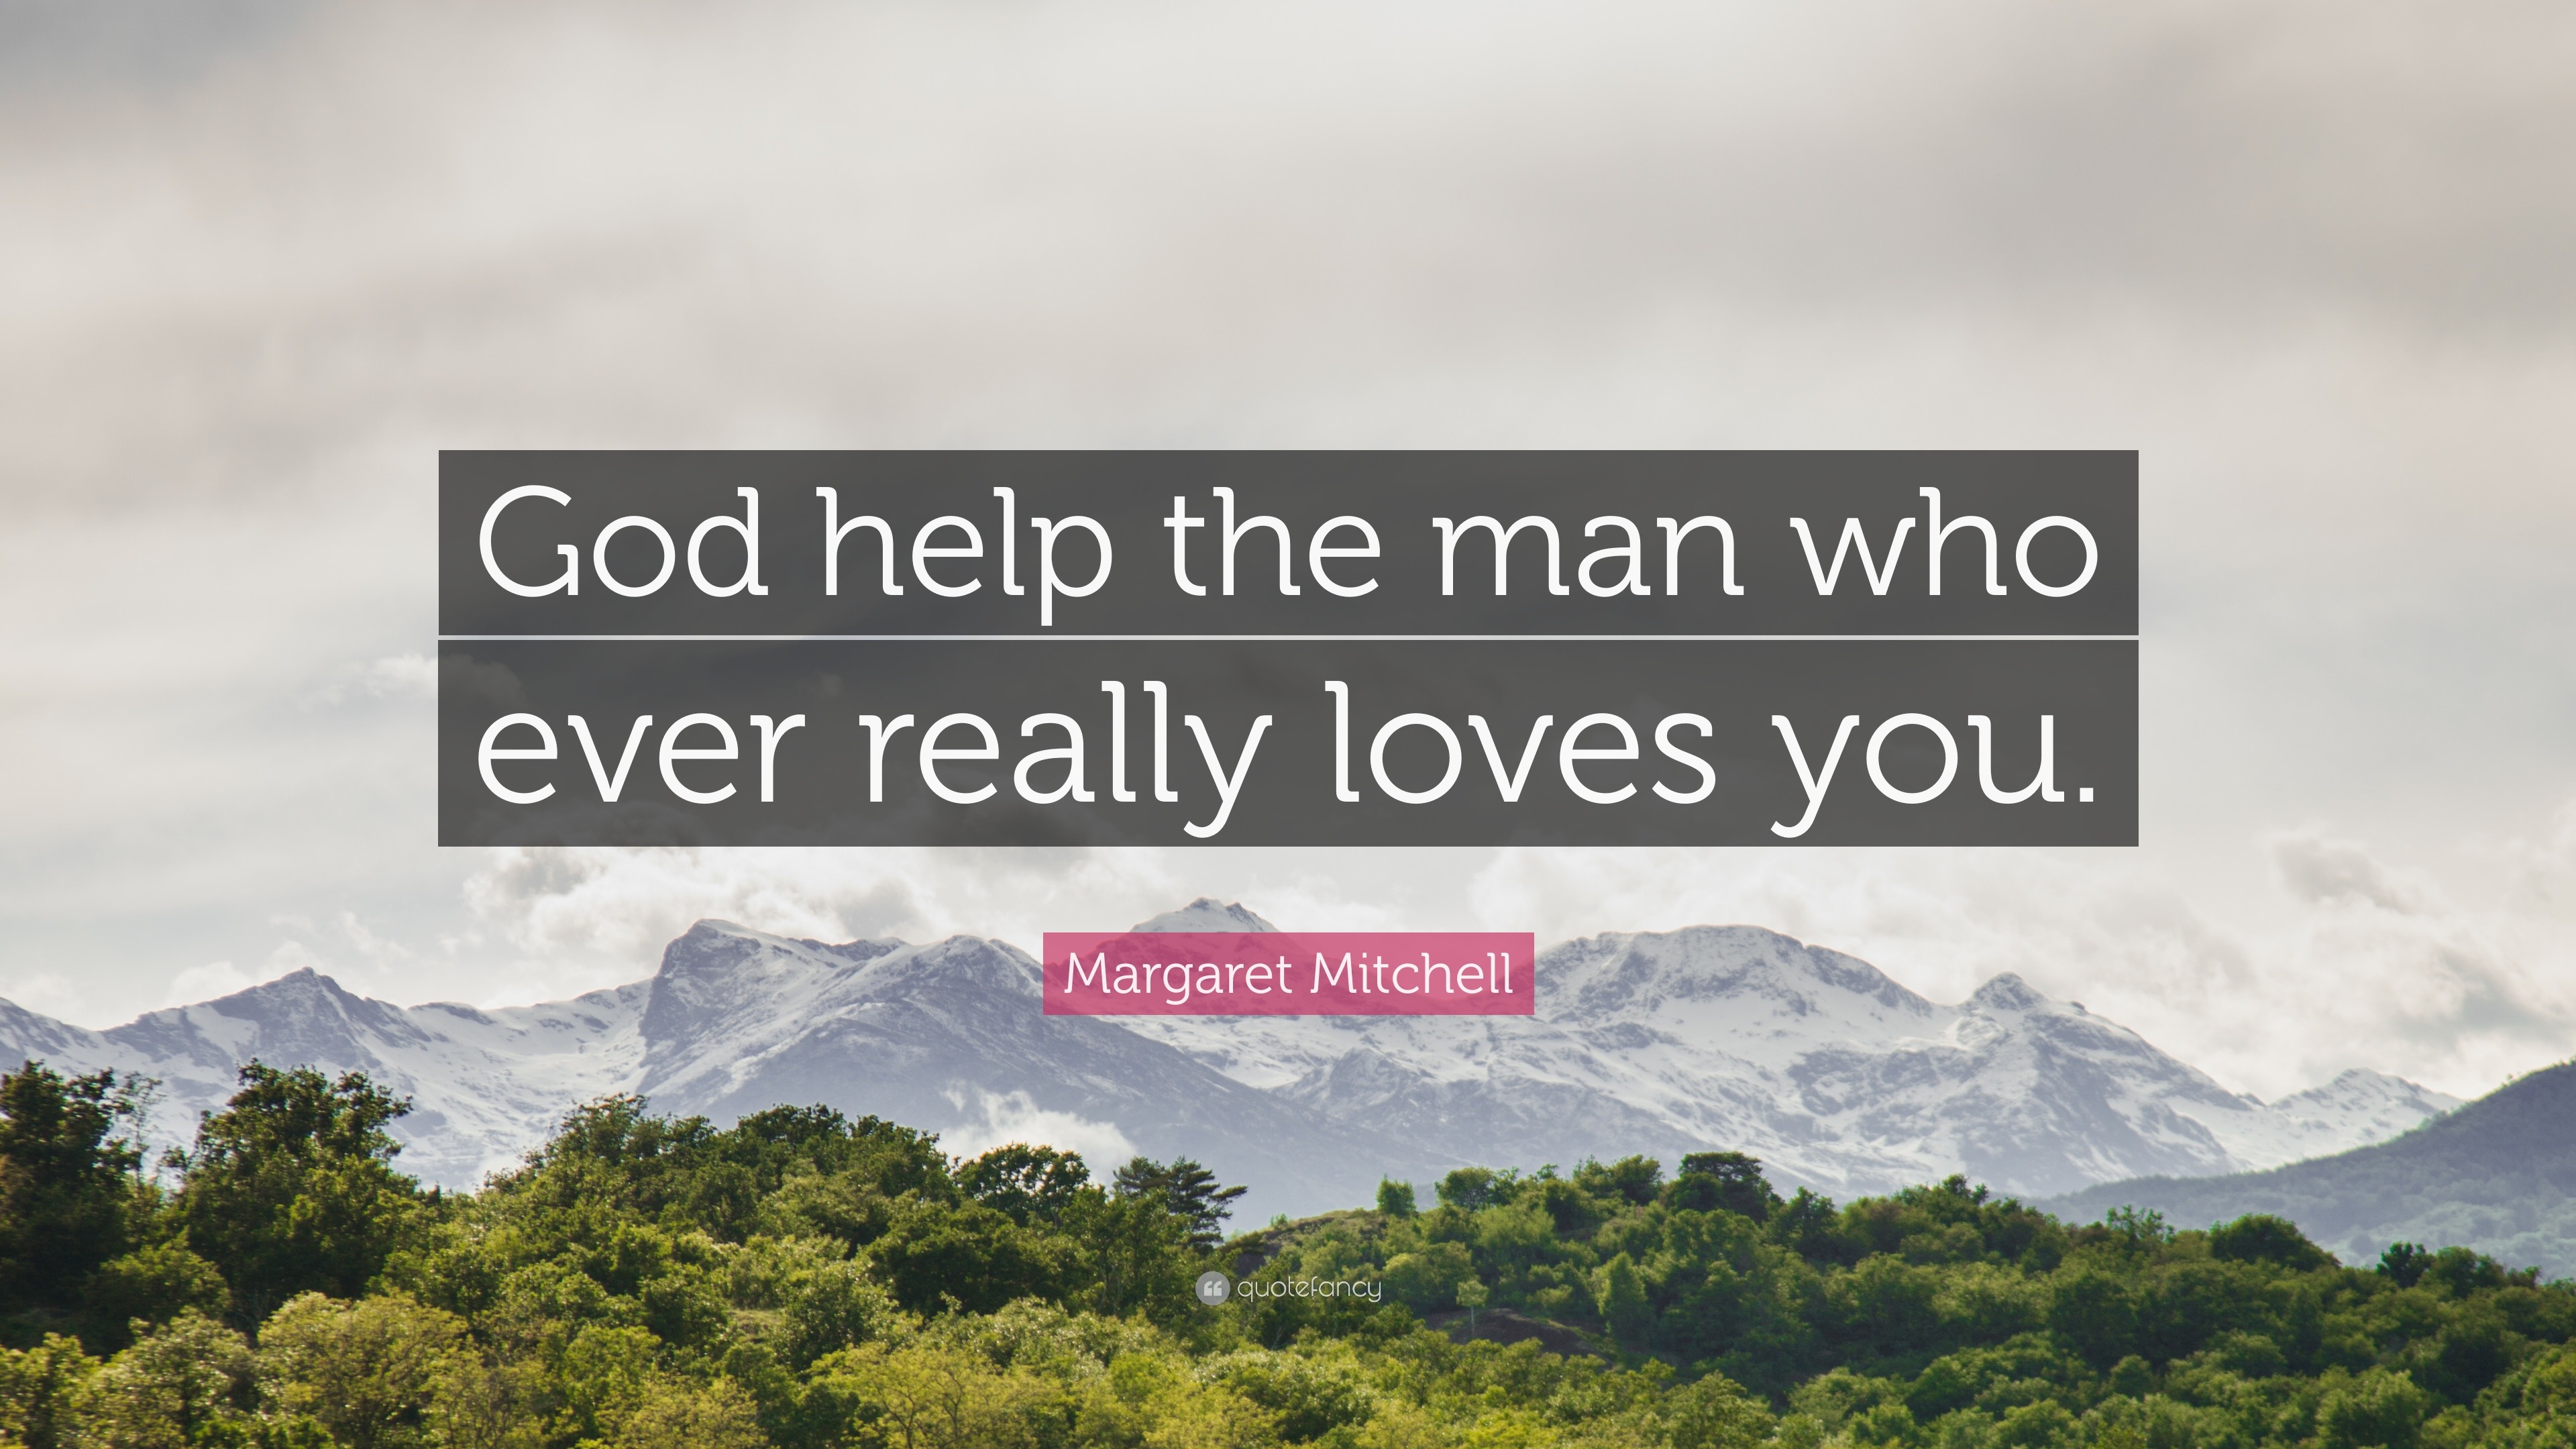 Margaret Mitchell Quote “God help the man who ever really loves you ”